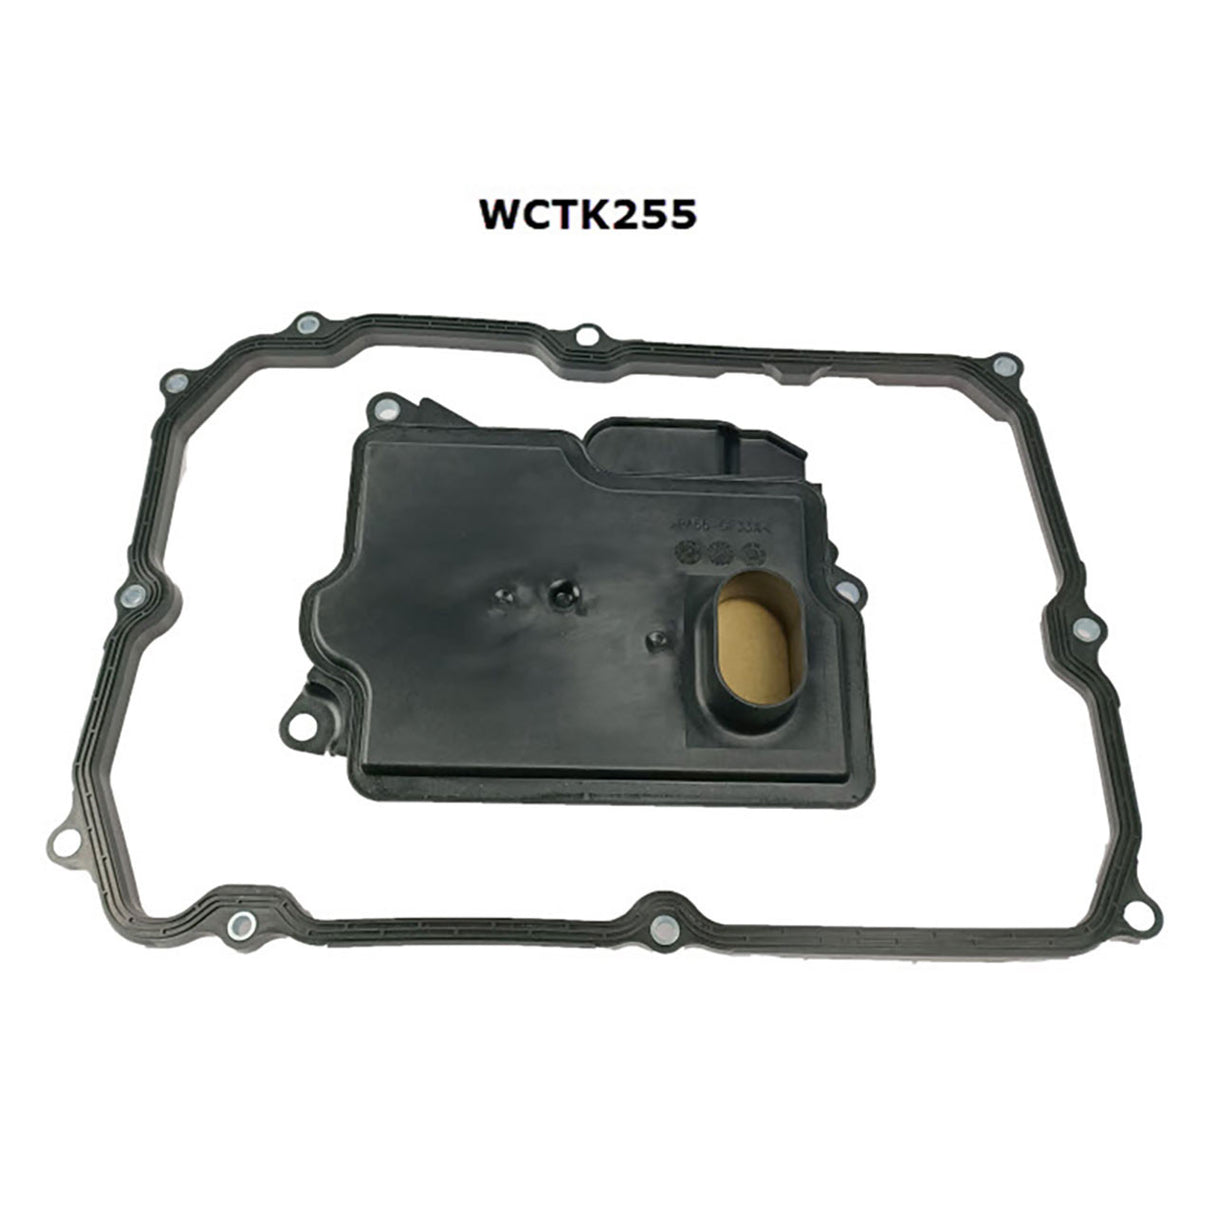 Transmission Filter Kit Toyota WCTK255 - Wesfil | Universal Auto Spares